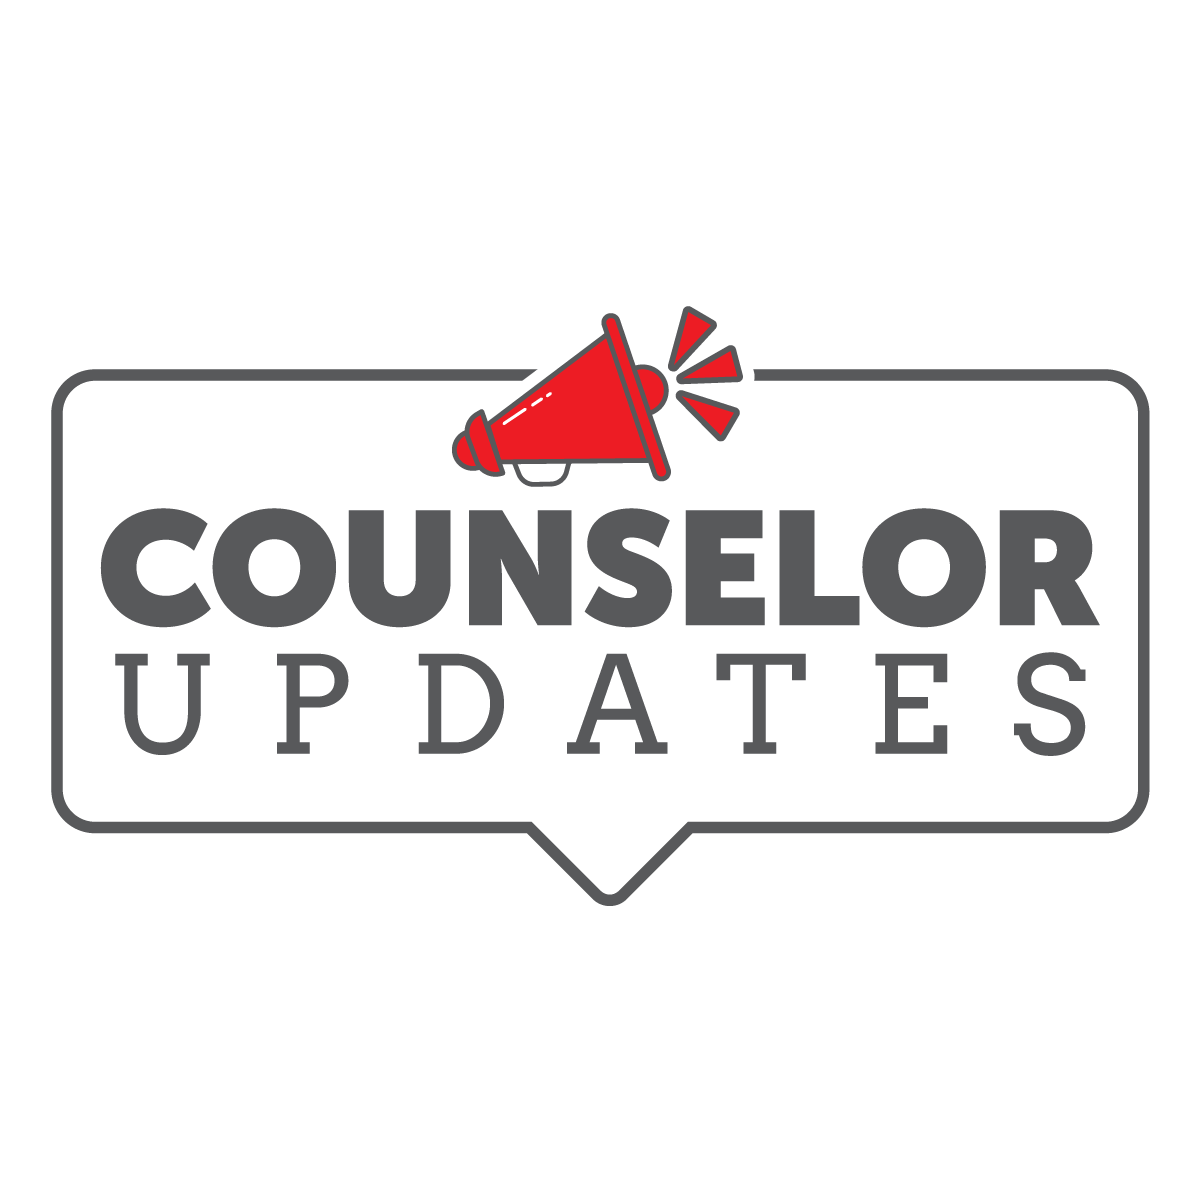 Counselor Updates